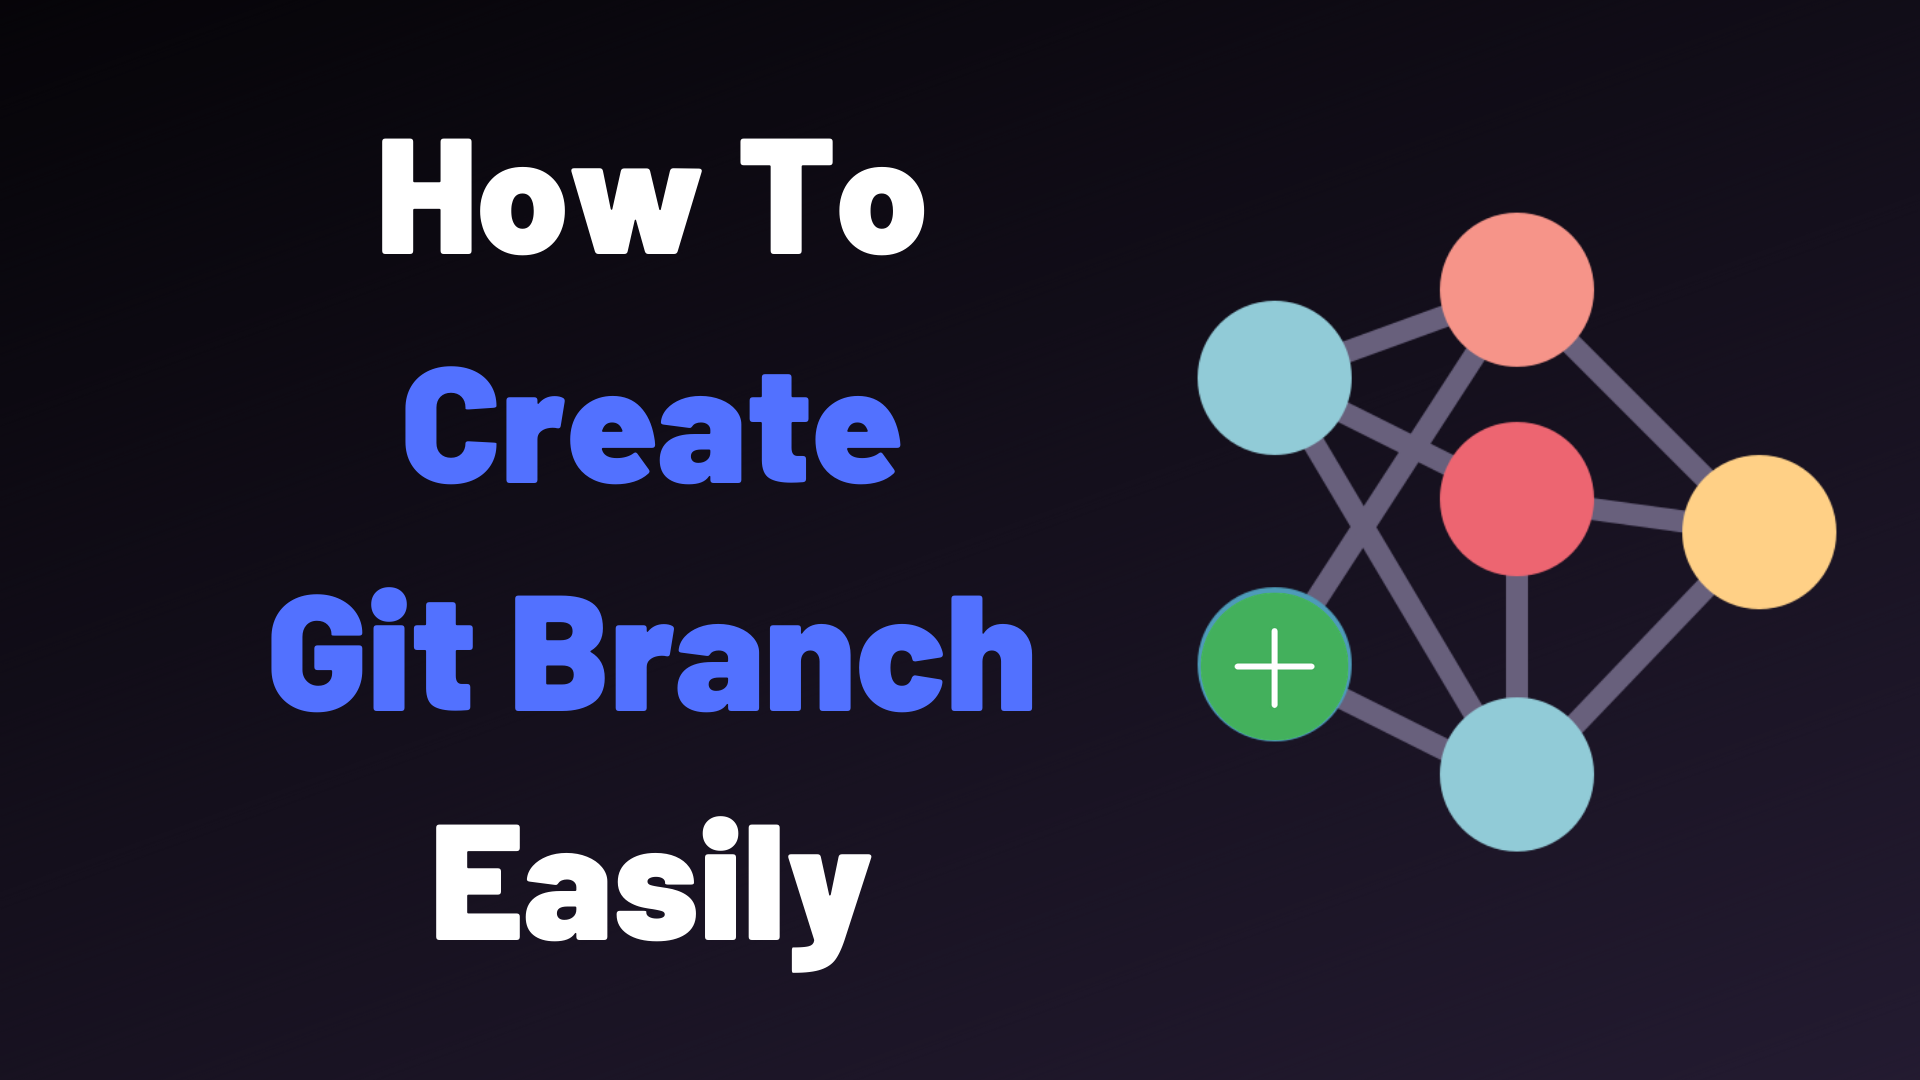 How To Create a Git Branch